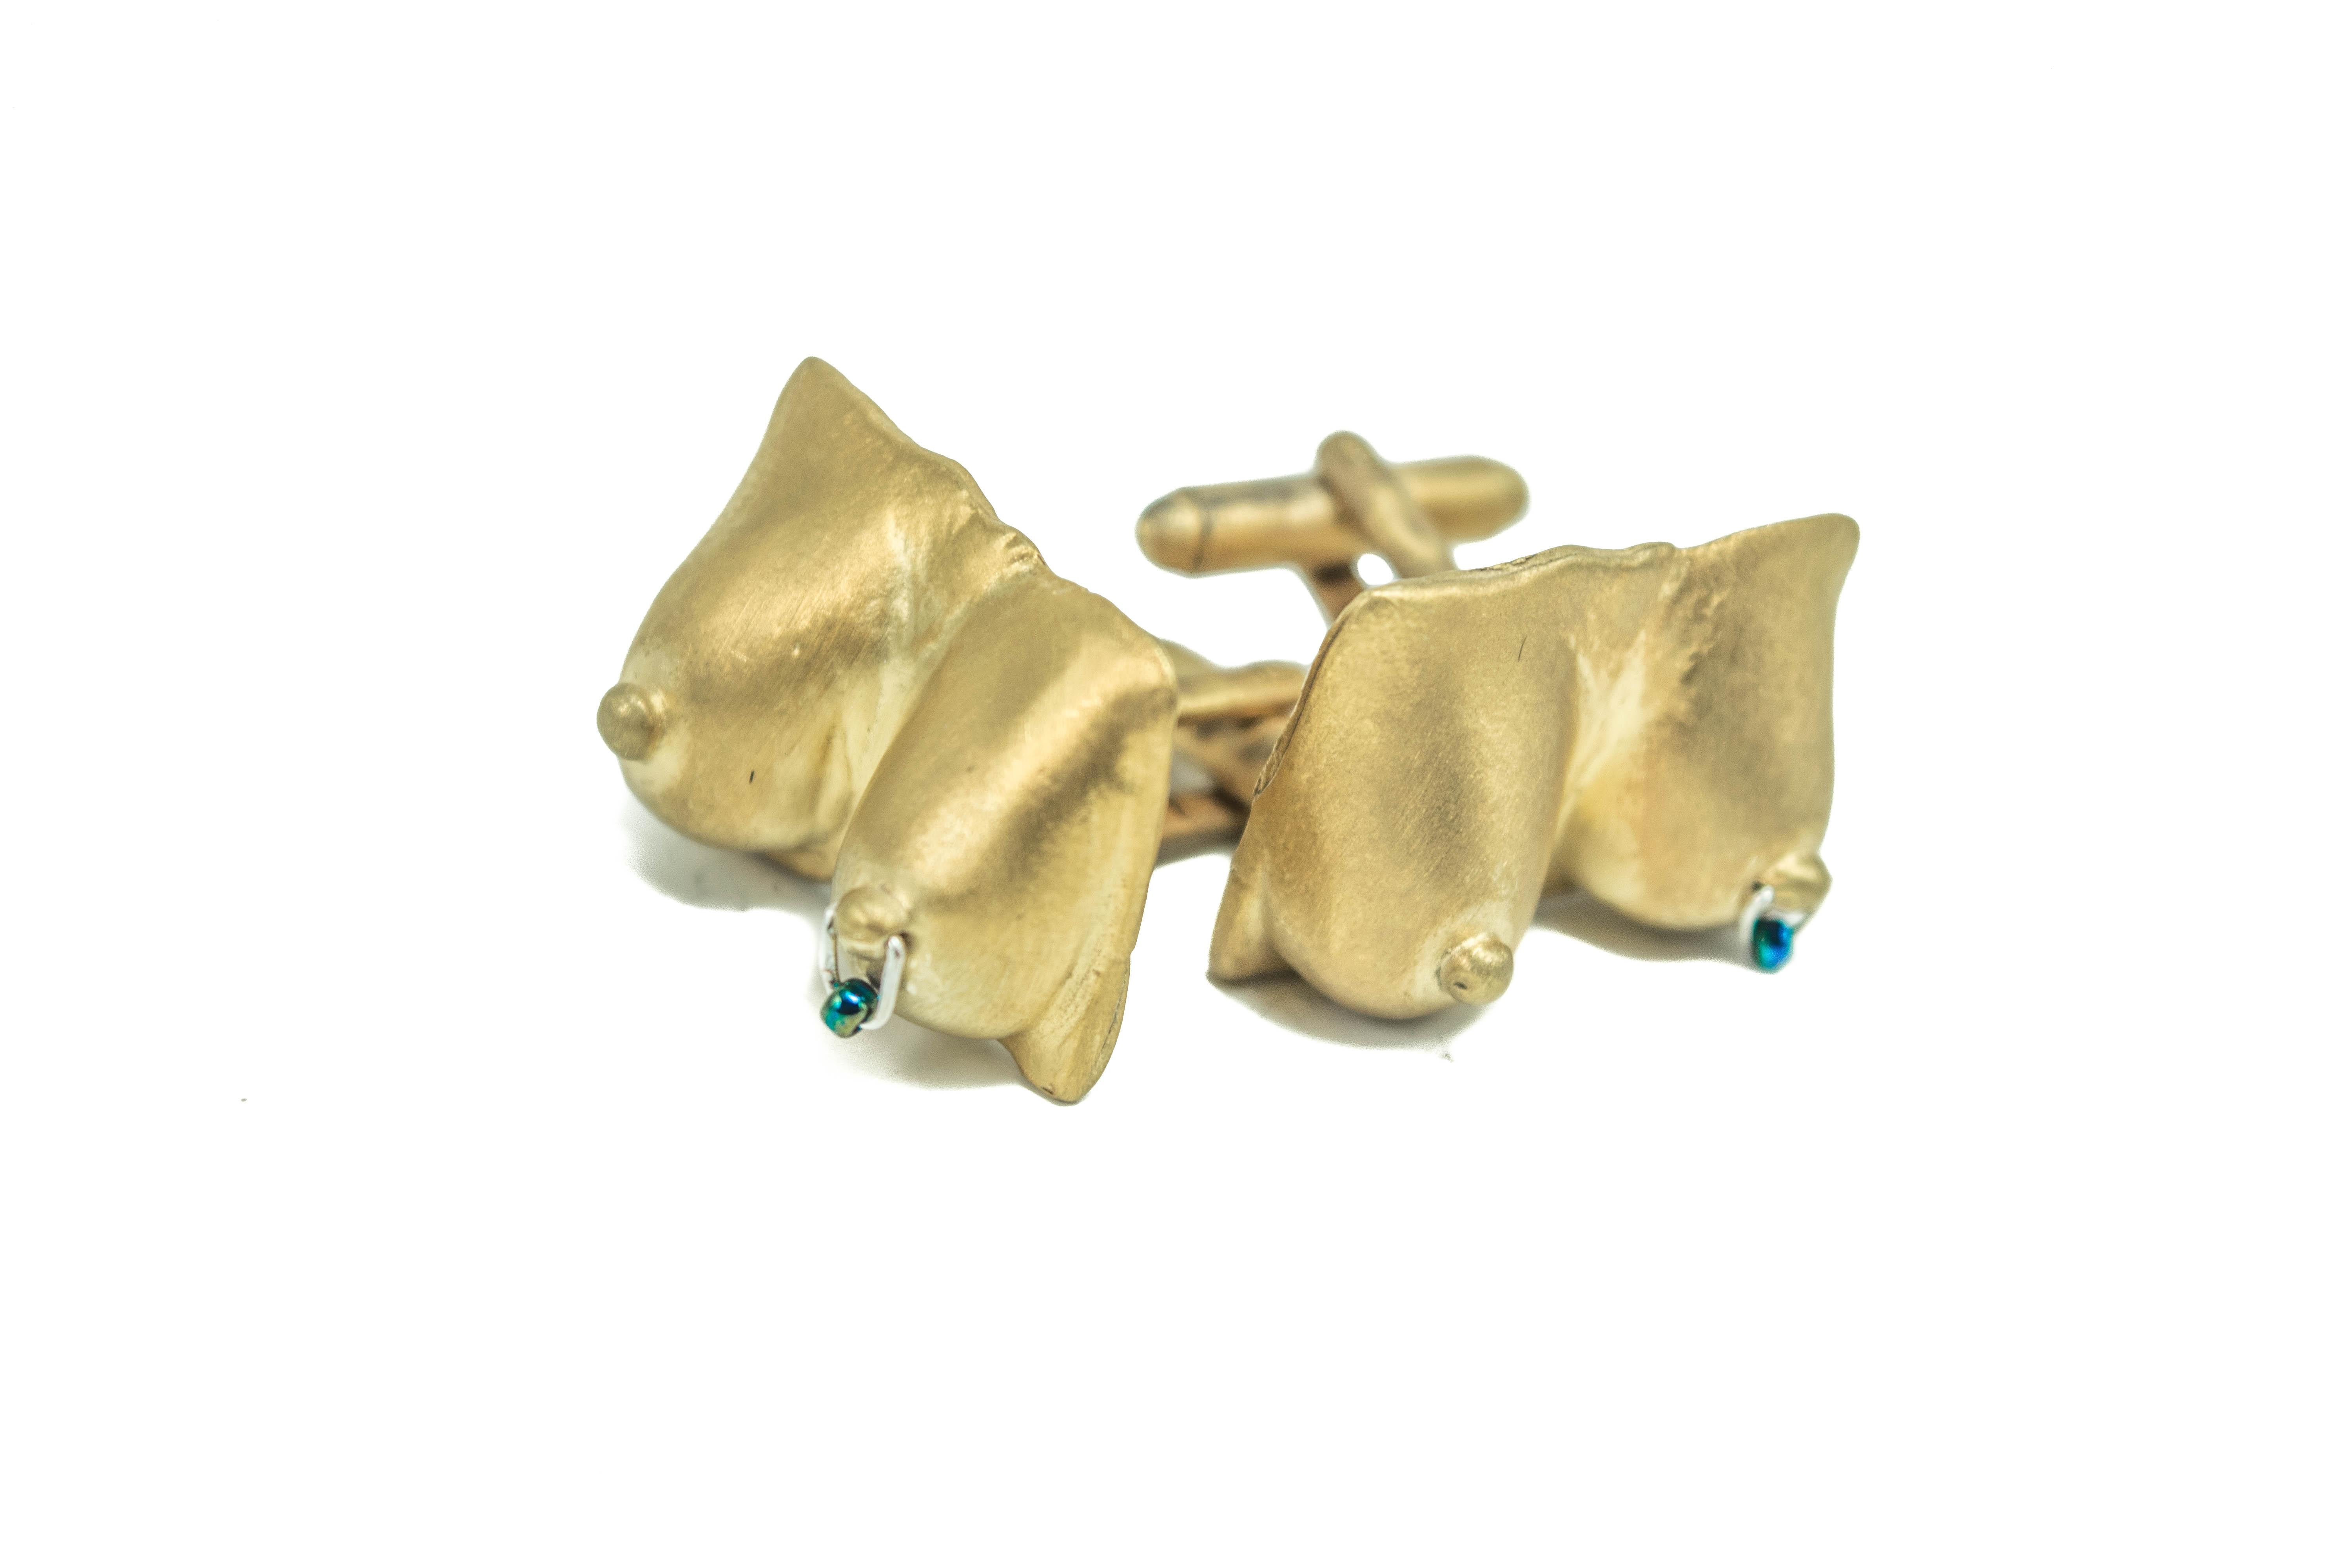 18K Gold-plated brass bust cufflinks with a pierced nipple.

Designed and created by Shanel Odum in New York-

